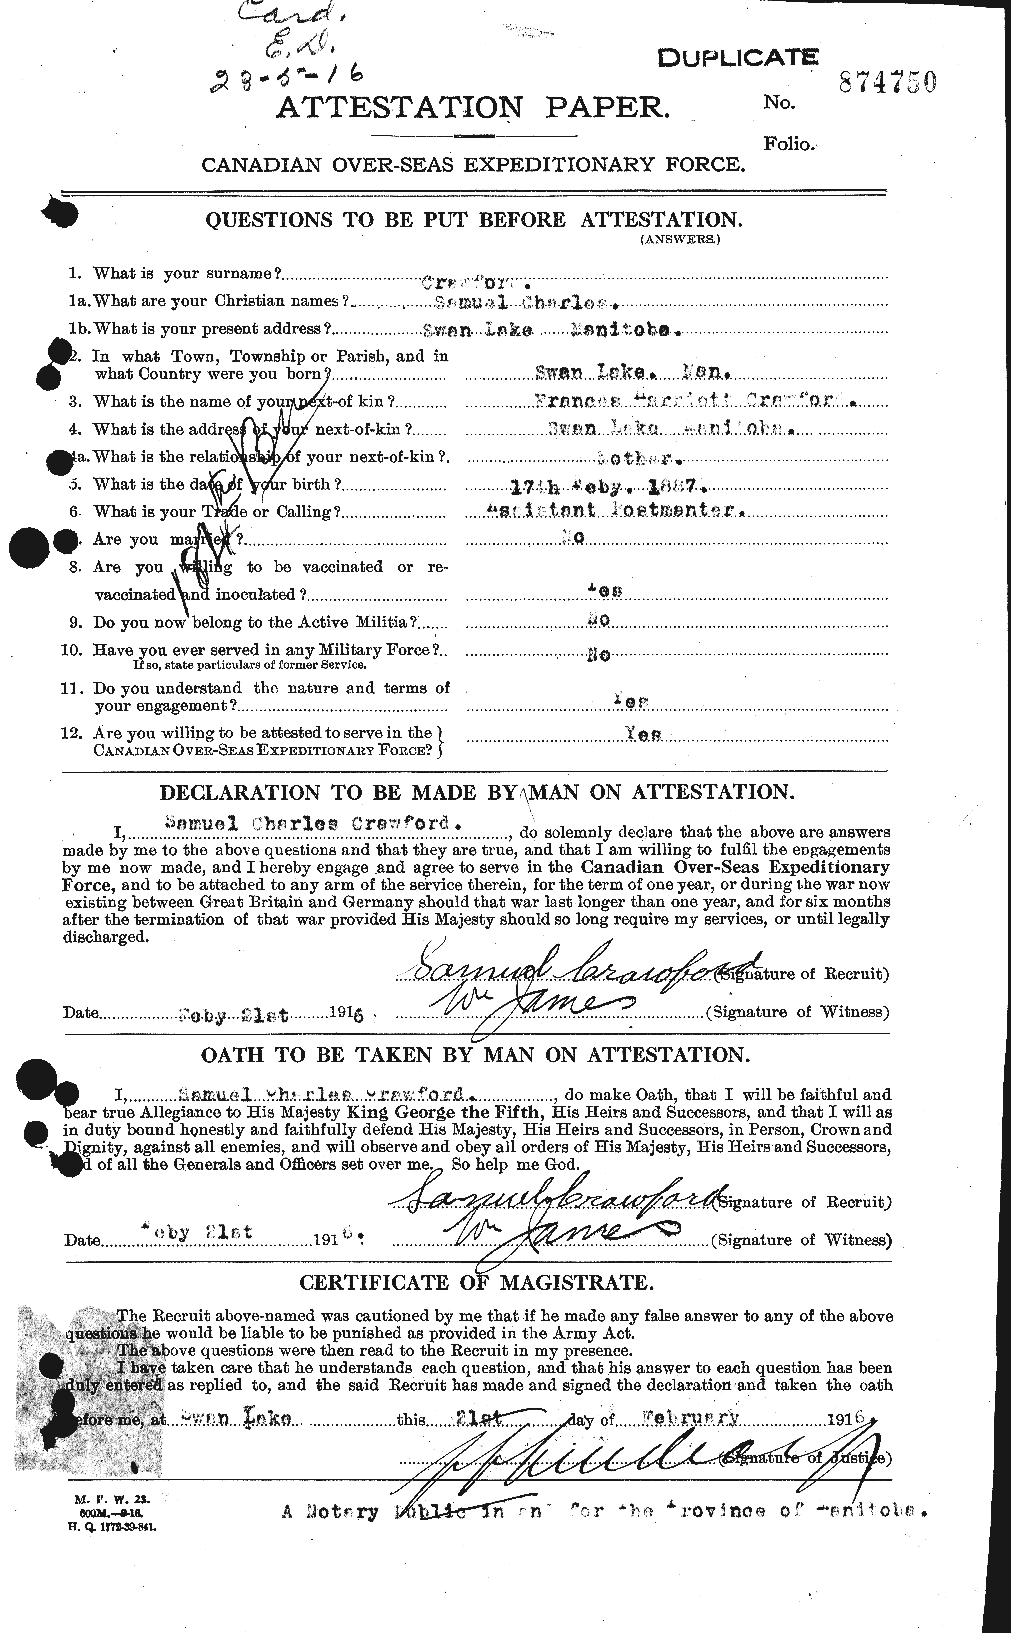 Personnel Records of the First World War - CEF 061376a